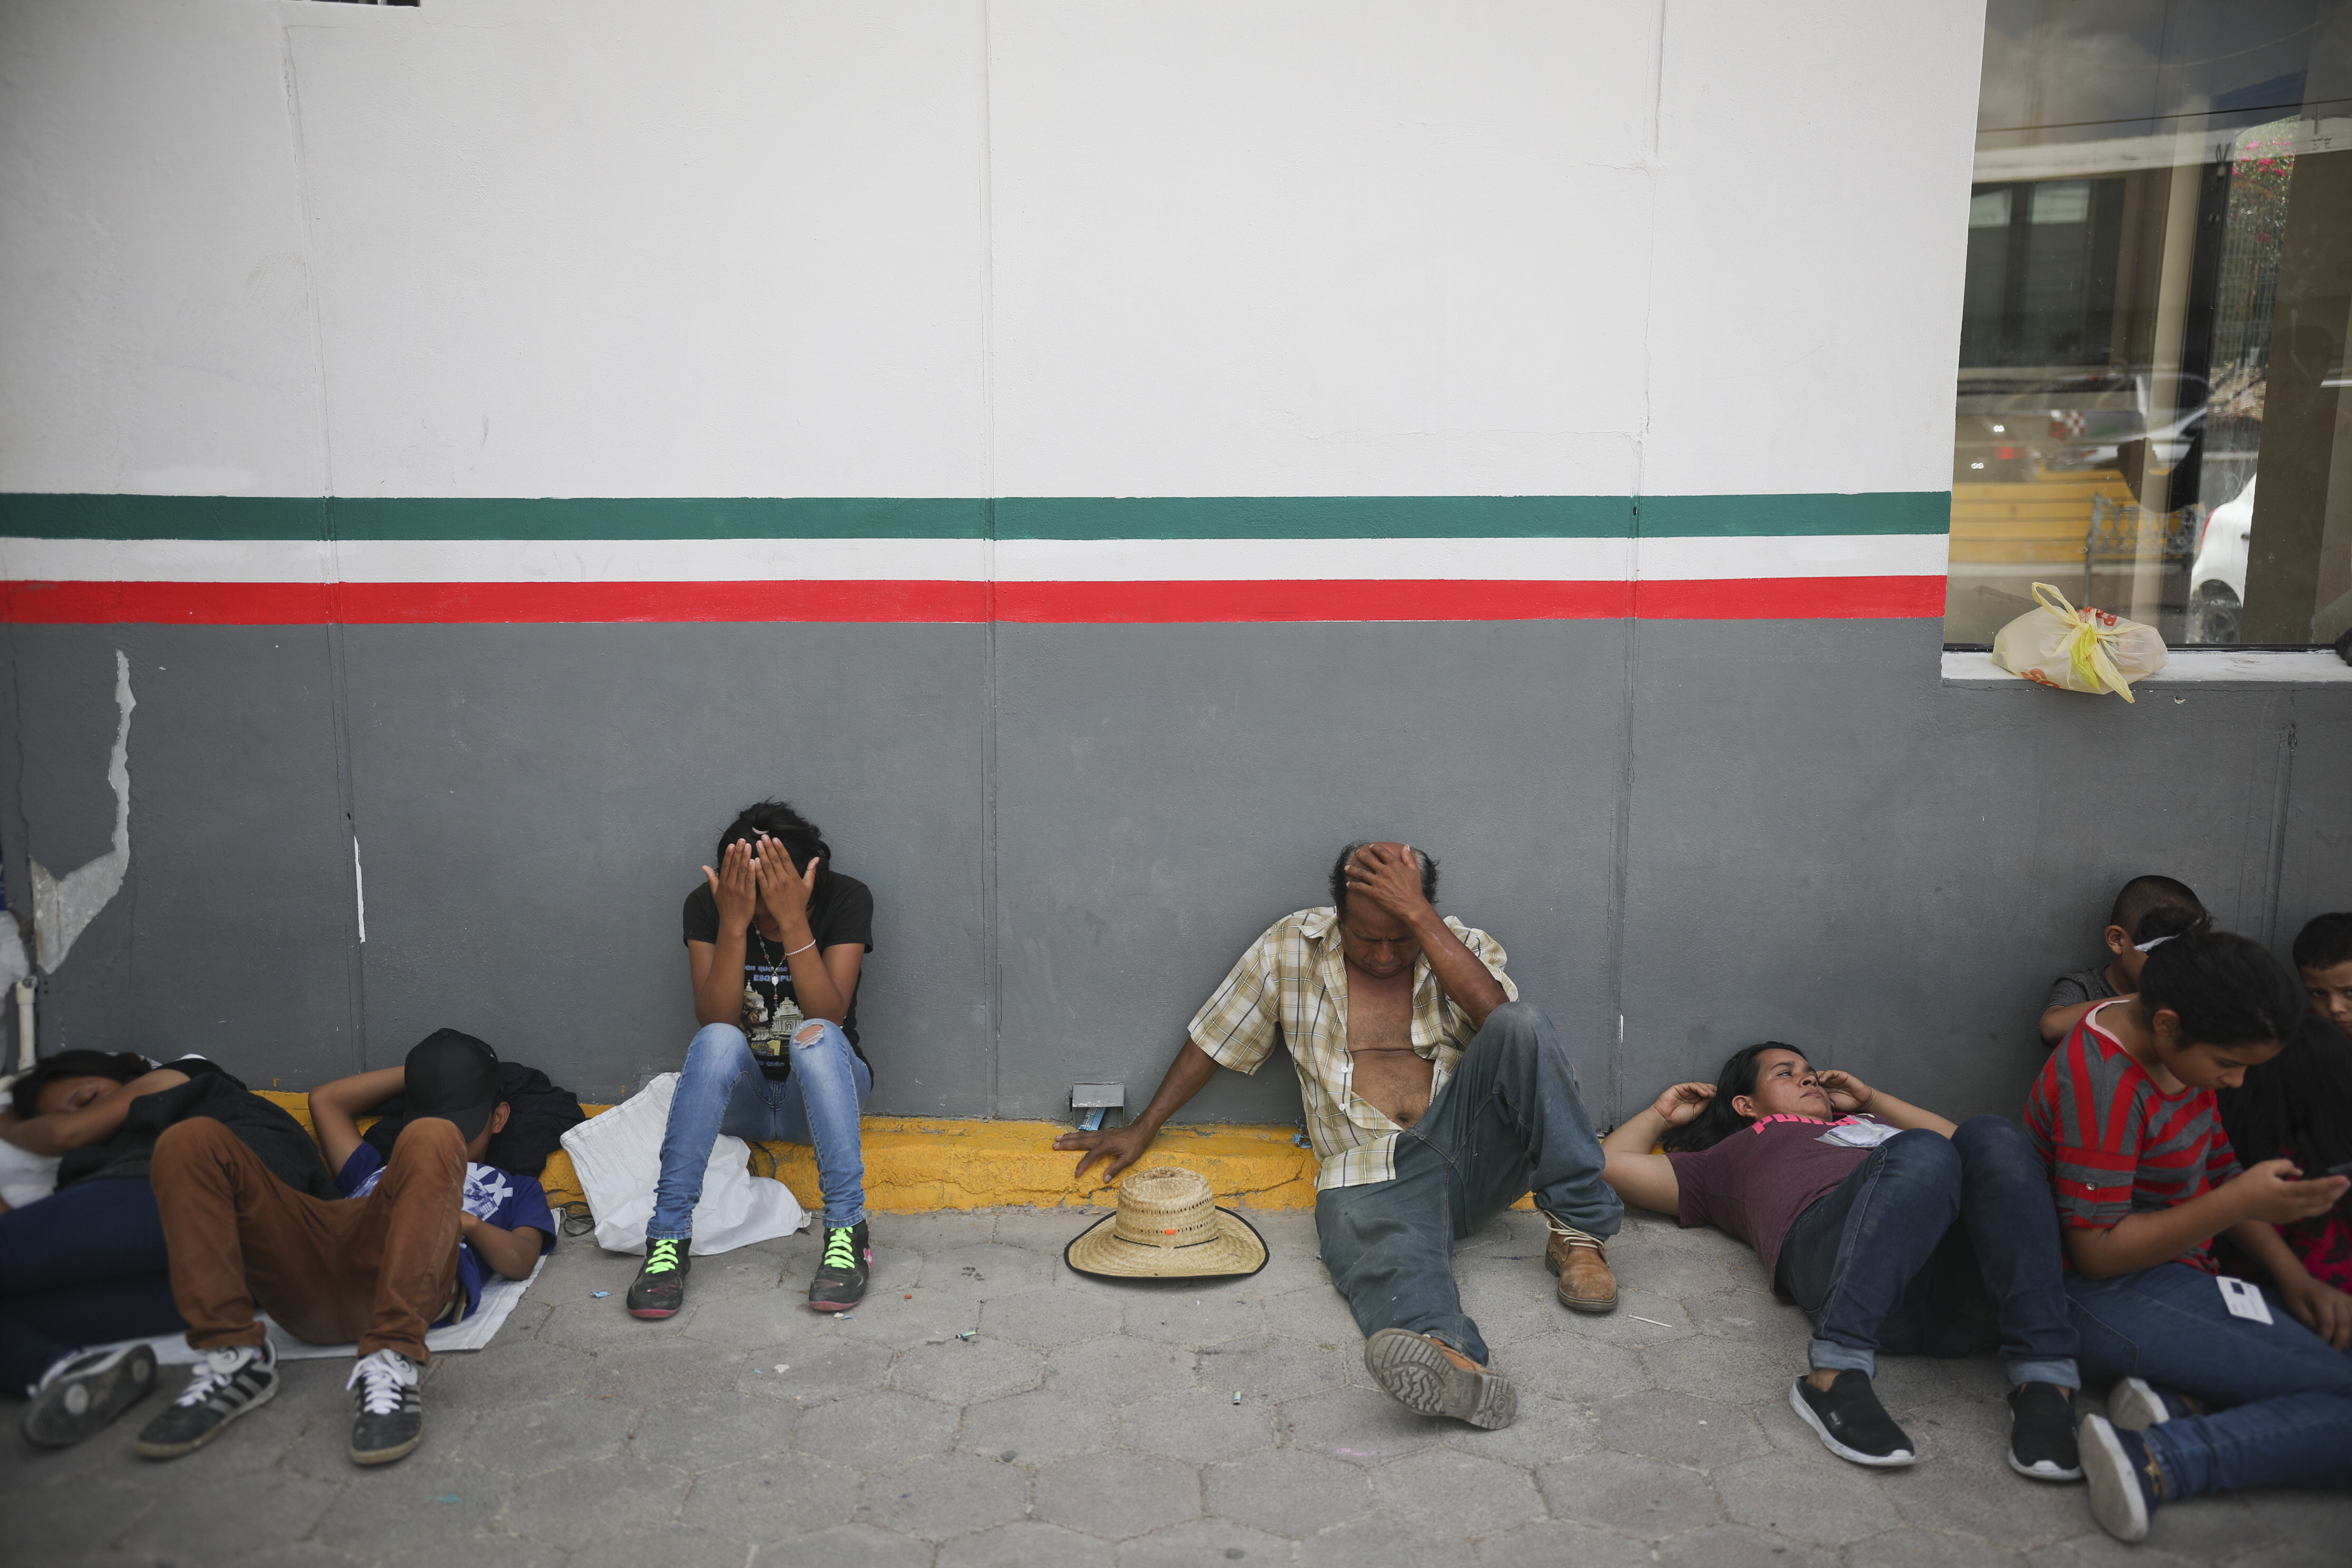 Migrants rest near a Mexican immigration center where people have set up a camp to sleep in Matamoros, Mexico, Thursday, Aug. 1, 2019, on the border with Brownsville, Texas. The United States government has sent some 800 mostly Central American and Cuban immigrants back to this northern Mexico border city since expanding its controversial plan to this easternmost point on the shared border two weeks ago, according to local Mexican authorities. (AP Photo/Emilio Espejel)